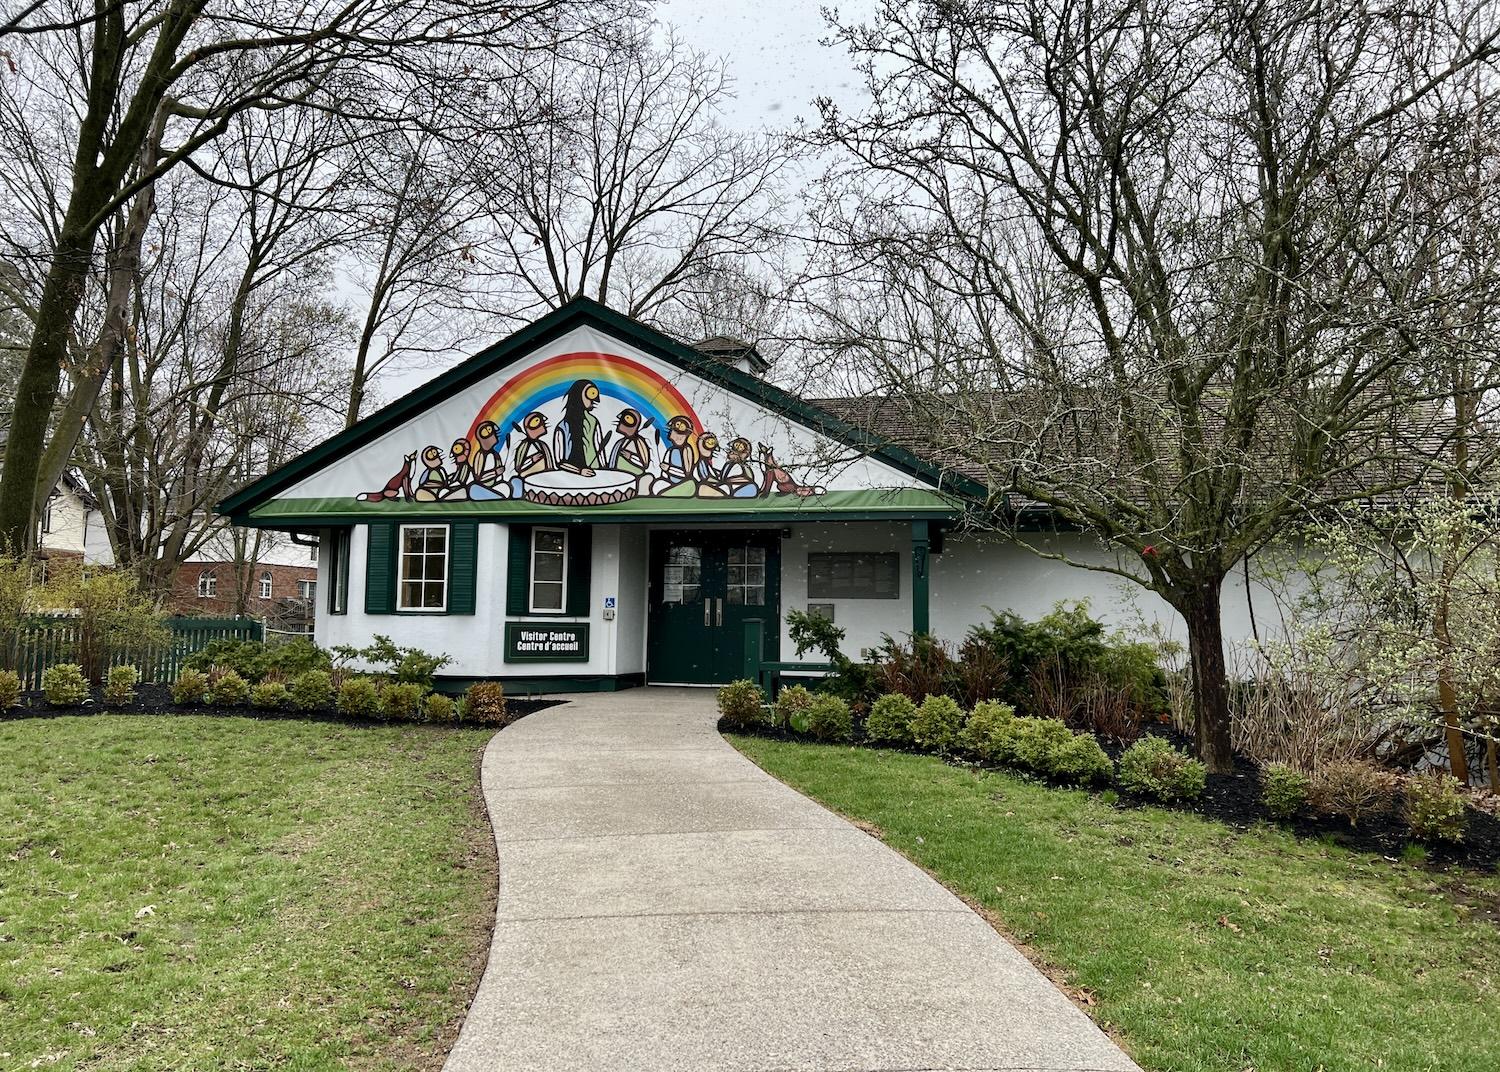 The visitor center at Bellevue House National Historic Site in Kingston, Ontario now features Indigenous artwork by Chris Mitchell.